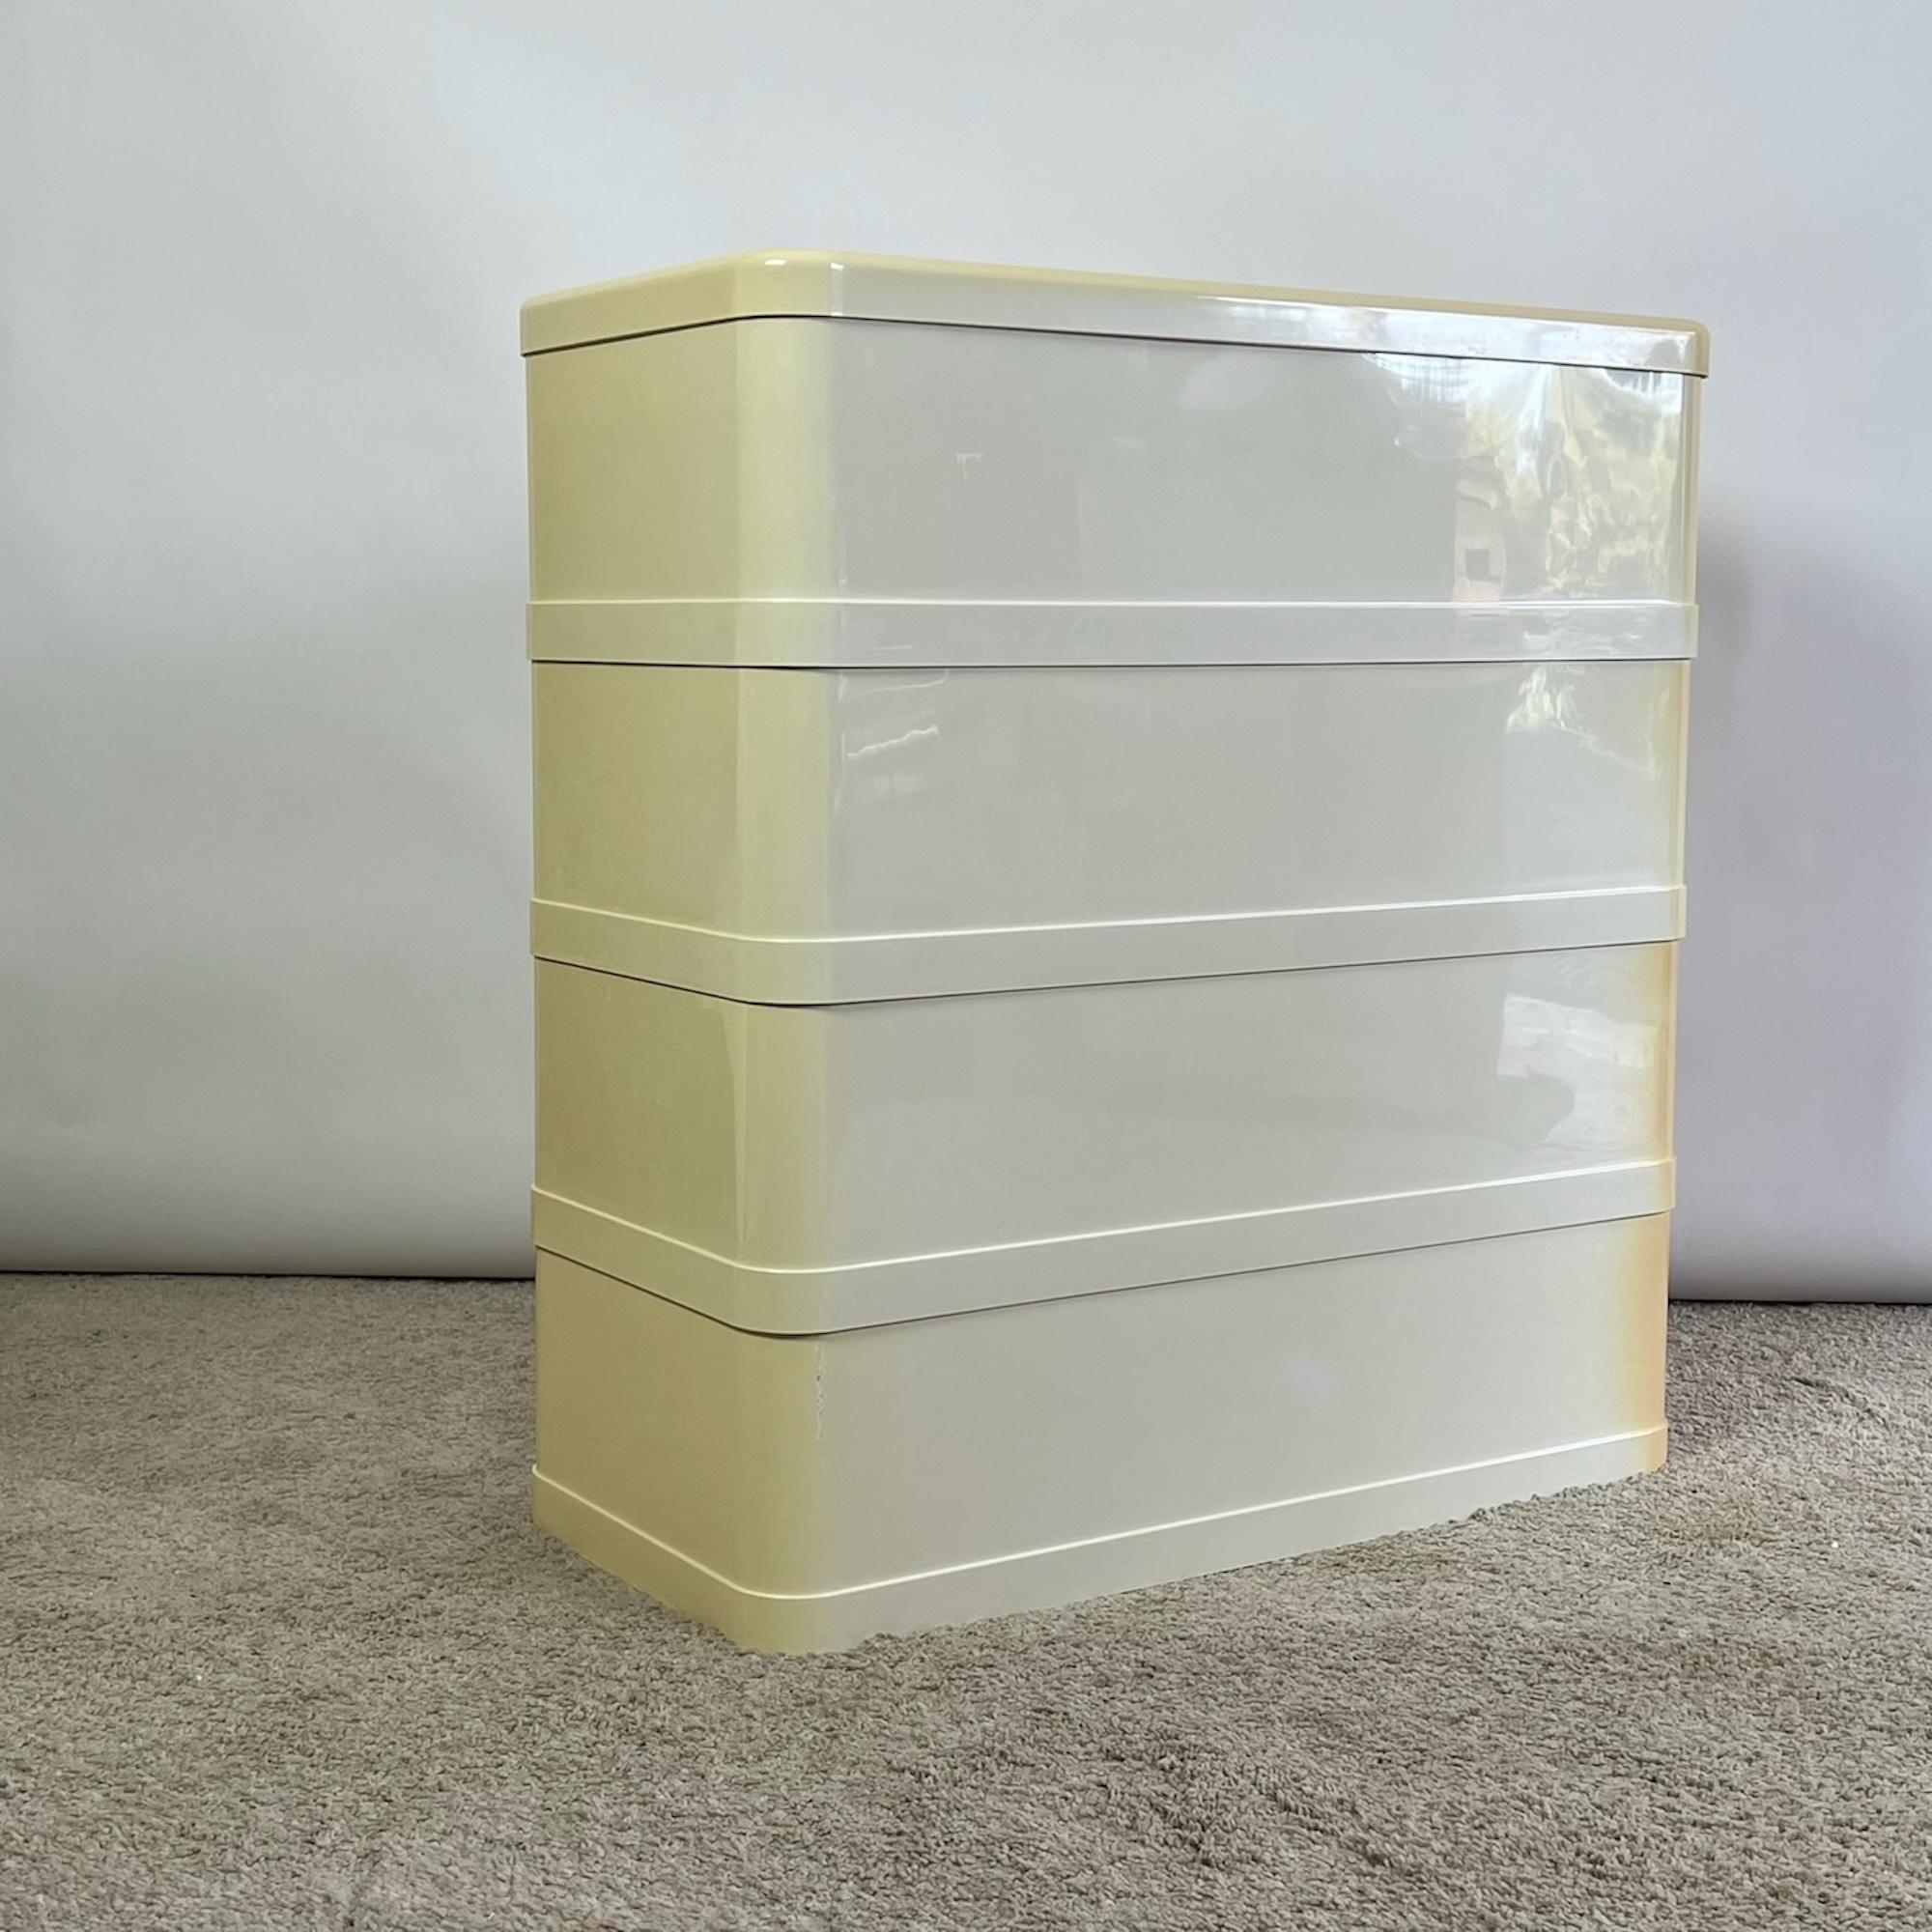 Italian Olaf Von Bohr Chest of Drawers Model 4964 by Kartell - Space Age design, 70s